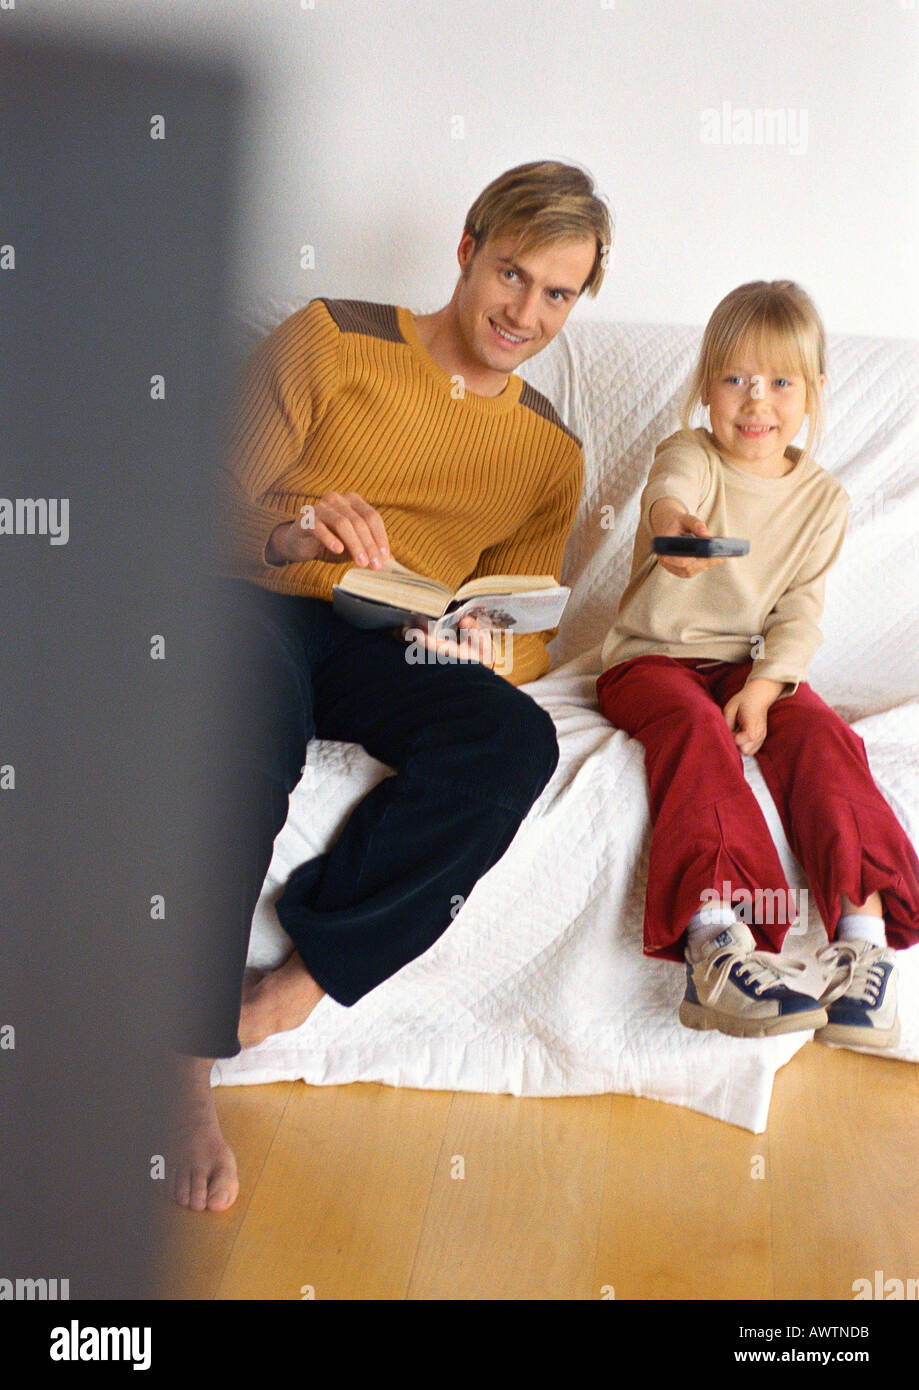 Father sitting next to daughter with remote control. Stock Photo